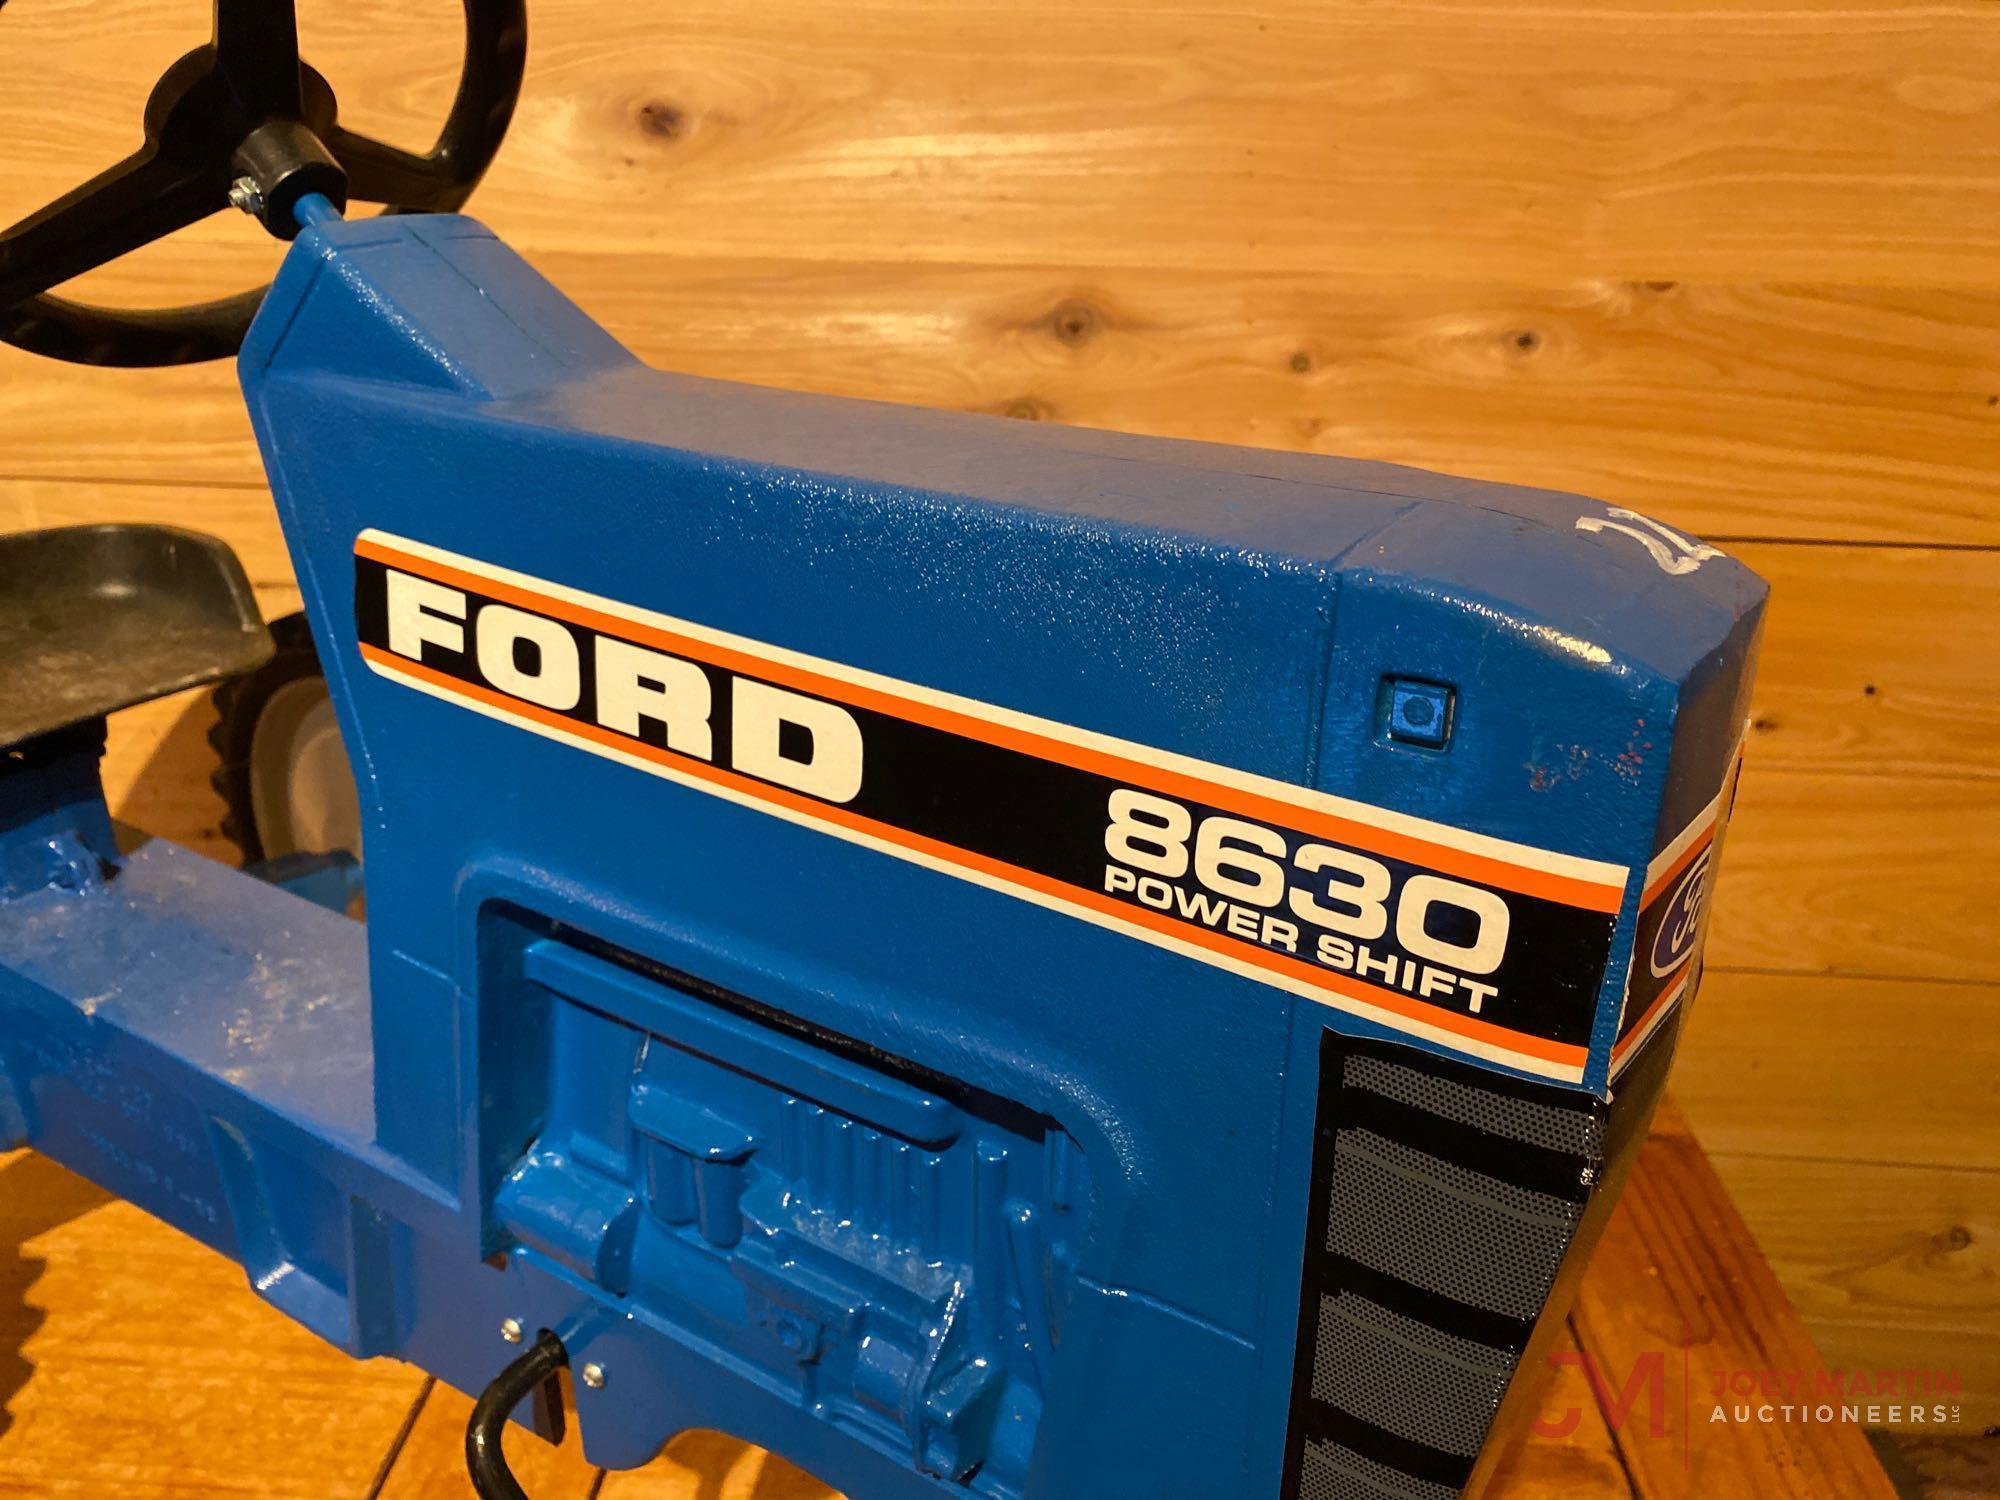 FORD 8630 POWER SHIFT PEDAL TRACTOR